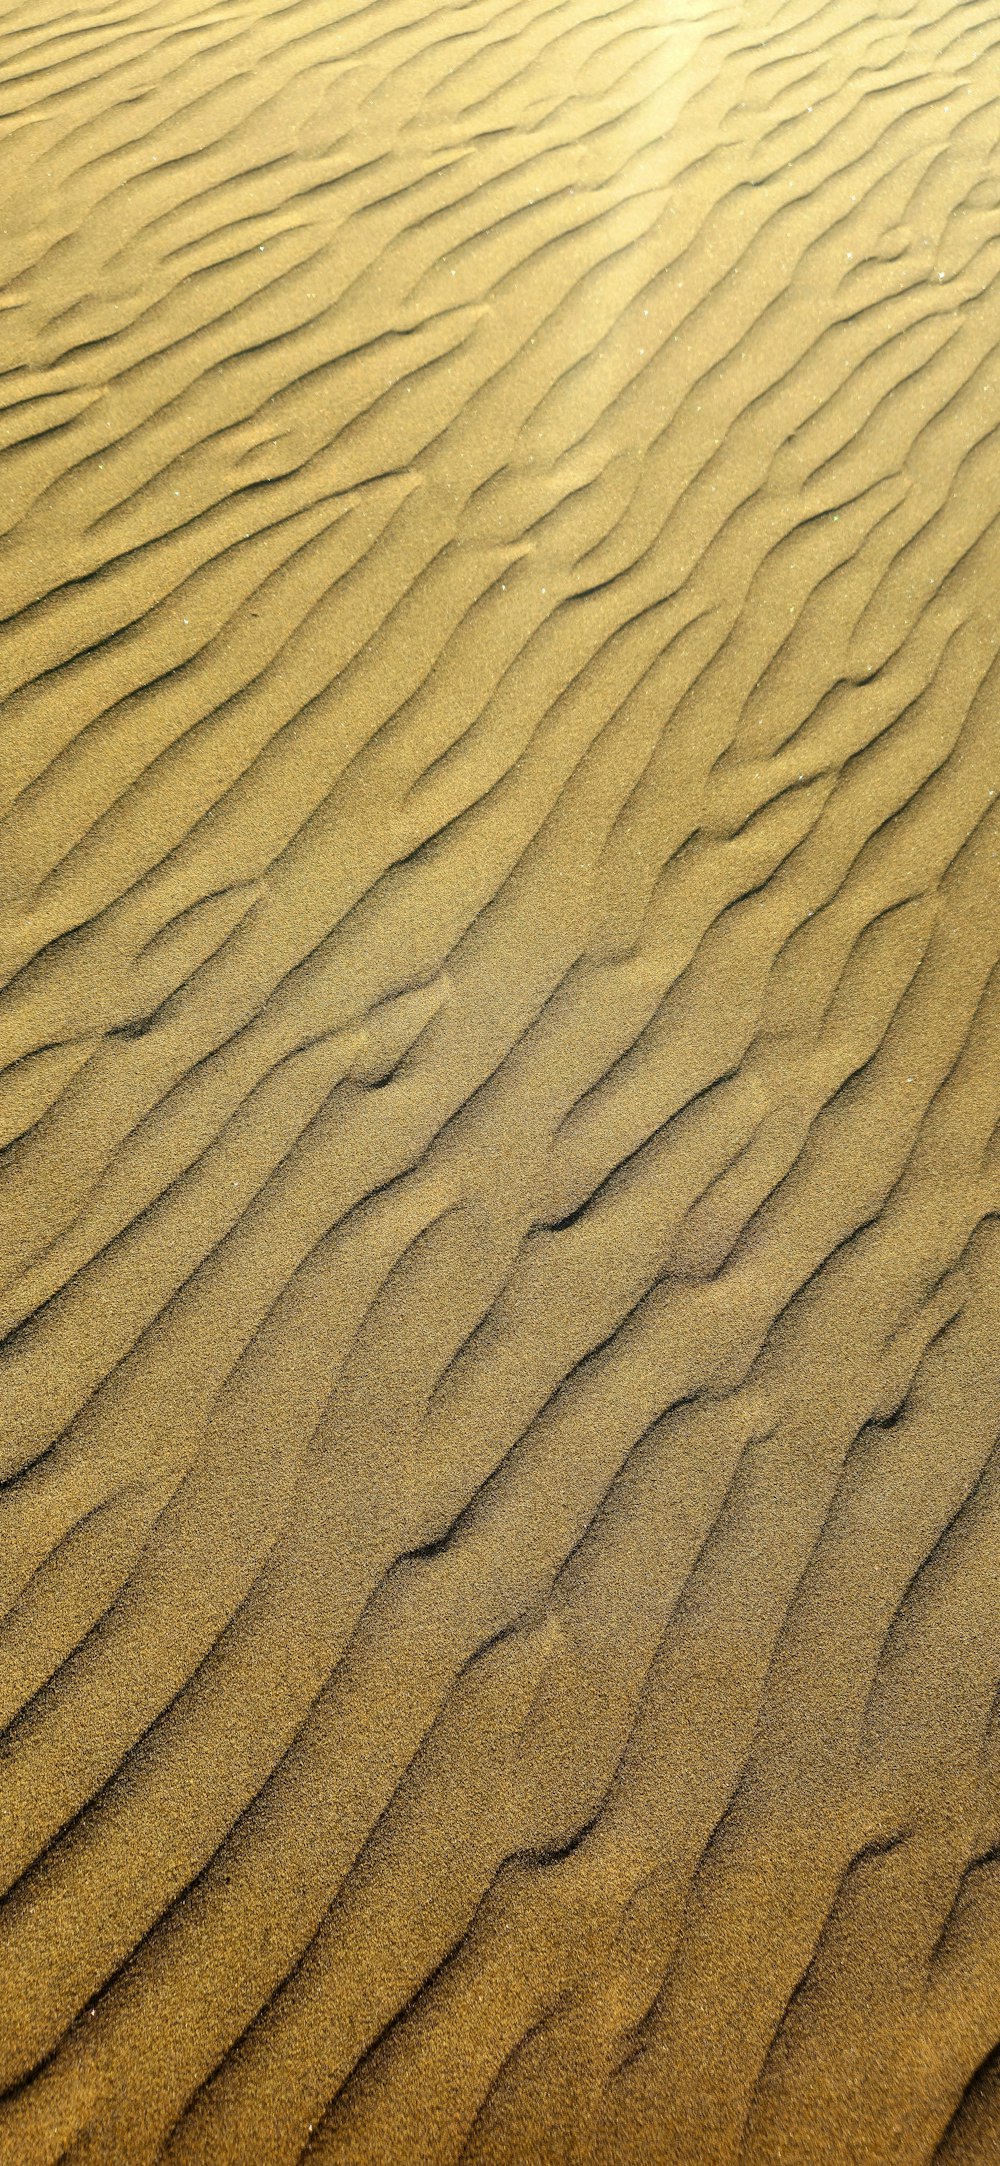 a sandy area with a small patch of grass in the middle of it